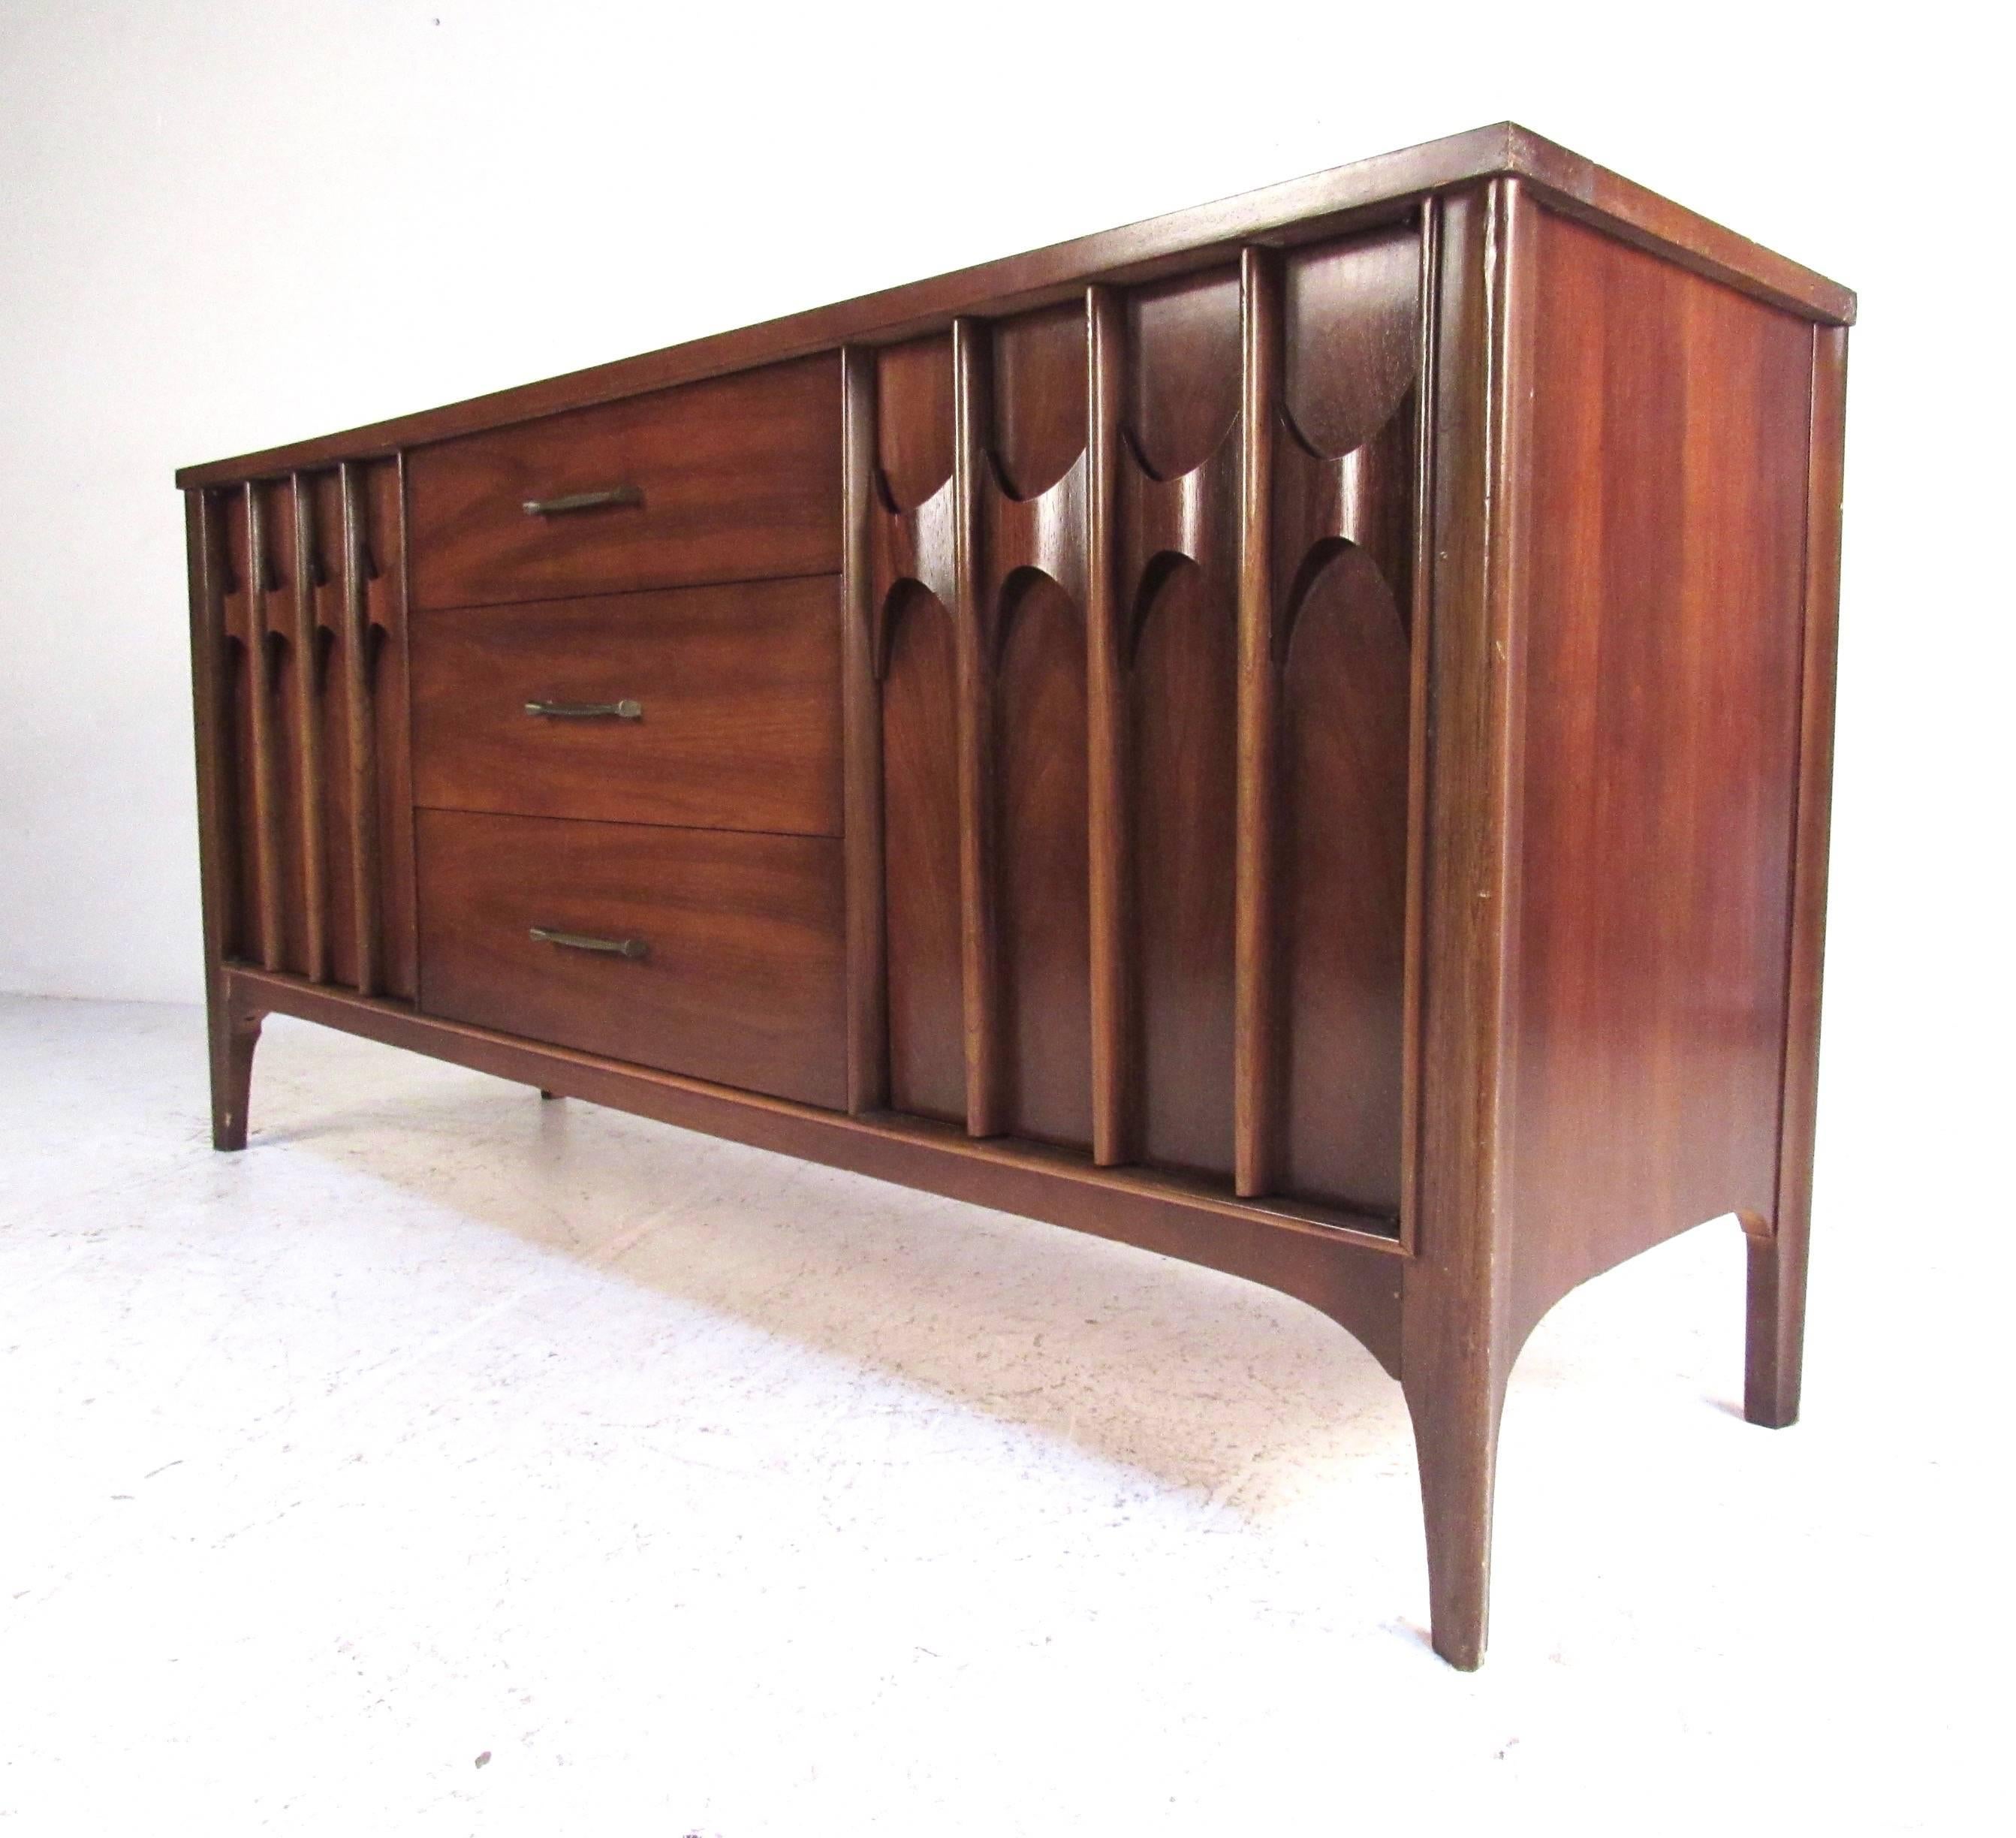 This vintage sideboard features sculpted modern door fronts, rich walnut finish, as well as a mix of interior cabinet space and drawers. Stylish mid-century credenza boasts Kent Coffey style and makes a great sideboard or credenza for dining room,